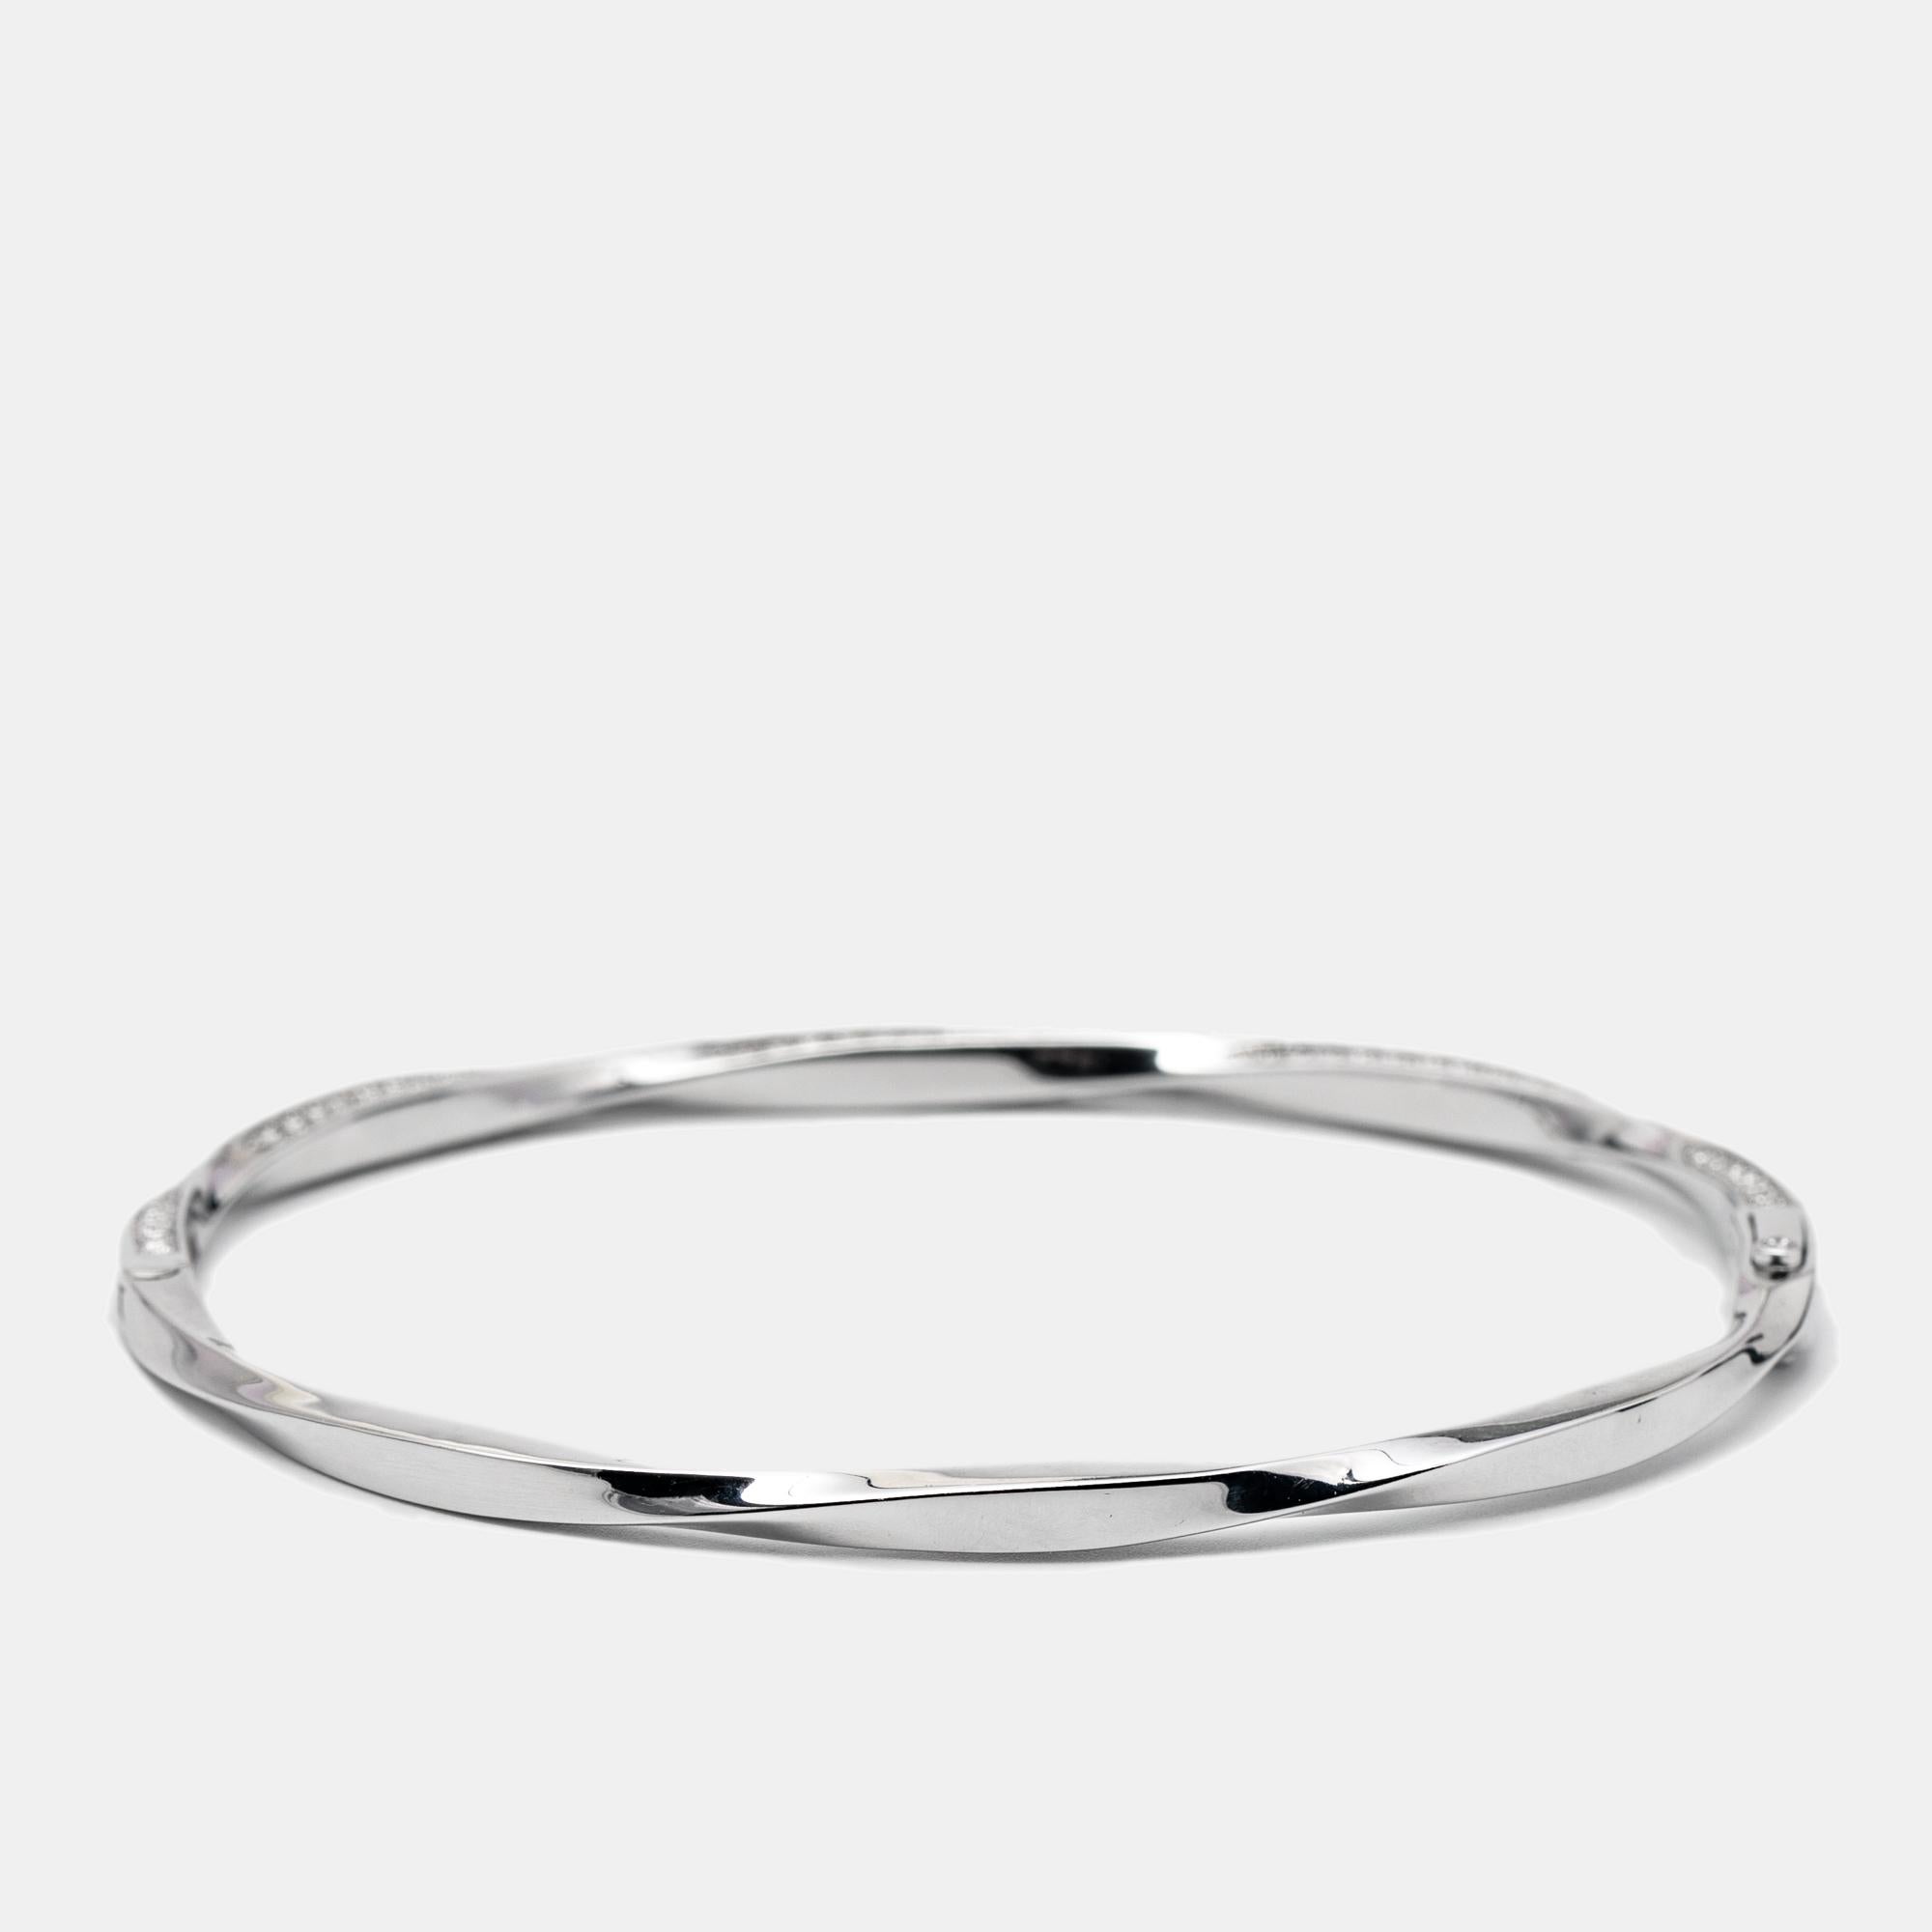 Modern, chic, and minimal, this Graff bangle bracelet is made for the woman of today! It has been sculpted using 18k white gold and studded with carefully-placed diamonds on its smooth surface. Stack it with a watch, other bangles, or wear it as